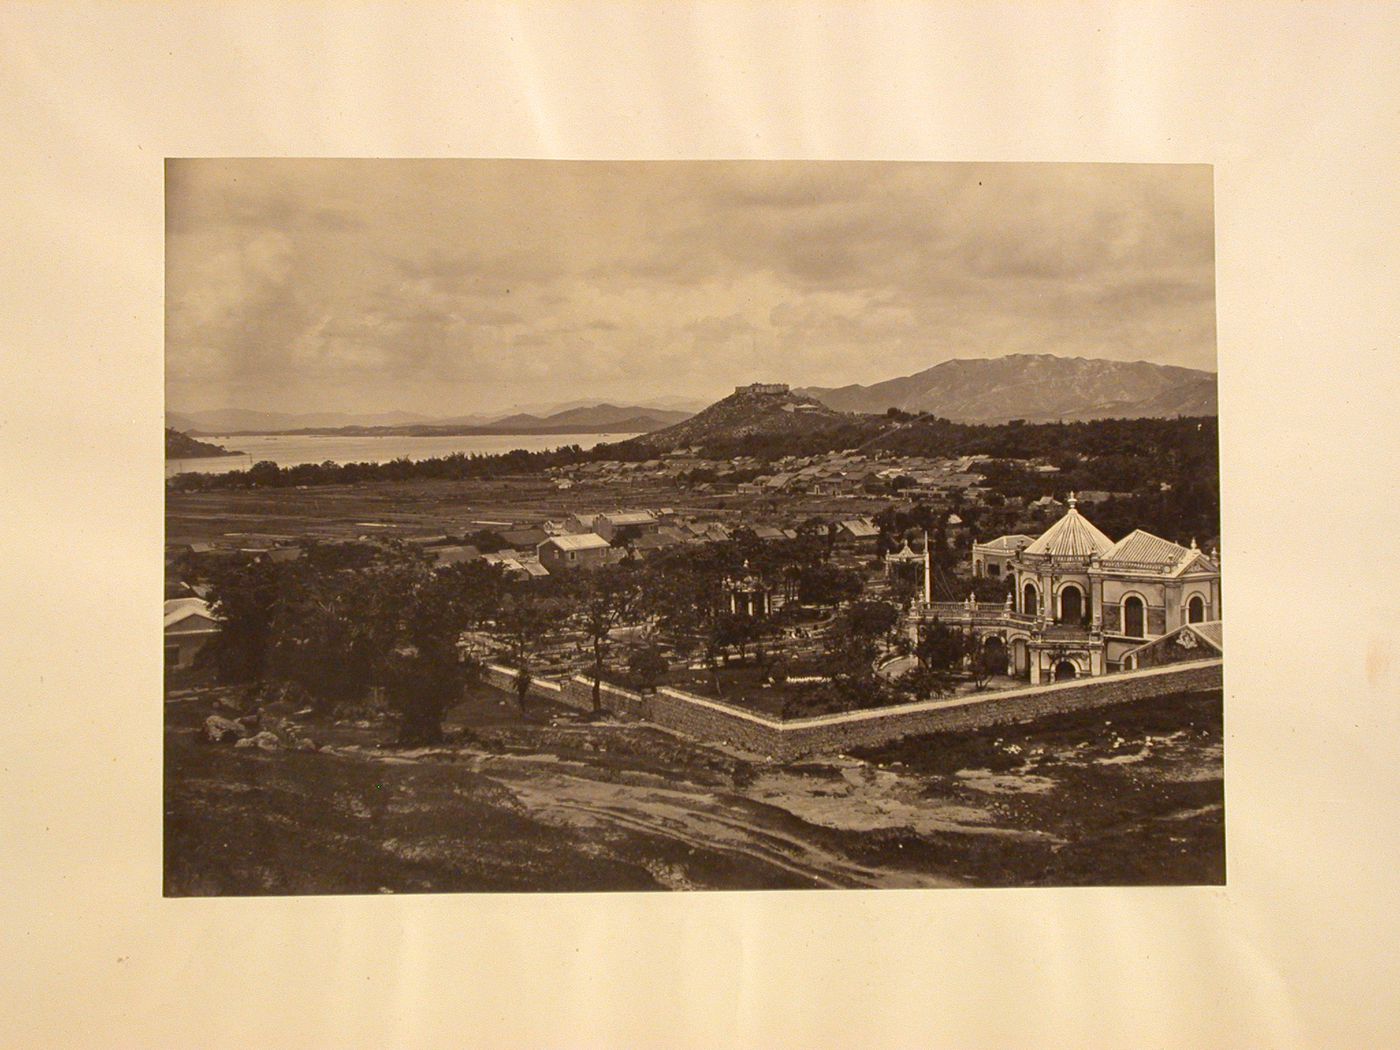 View of a house and garden compound with Mong Ha Fort on a hill in the background, taken from Guia Hill, Macau (now Macau, China)